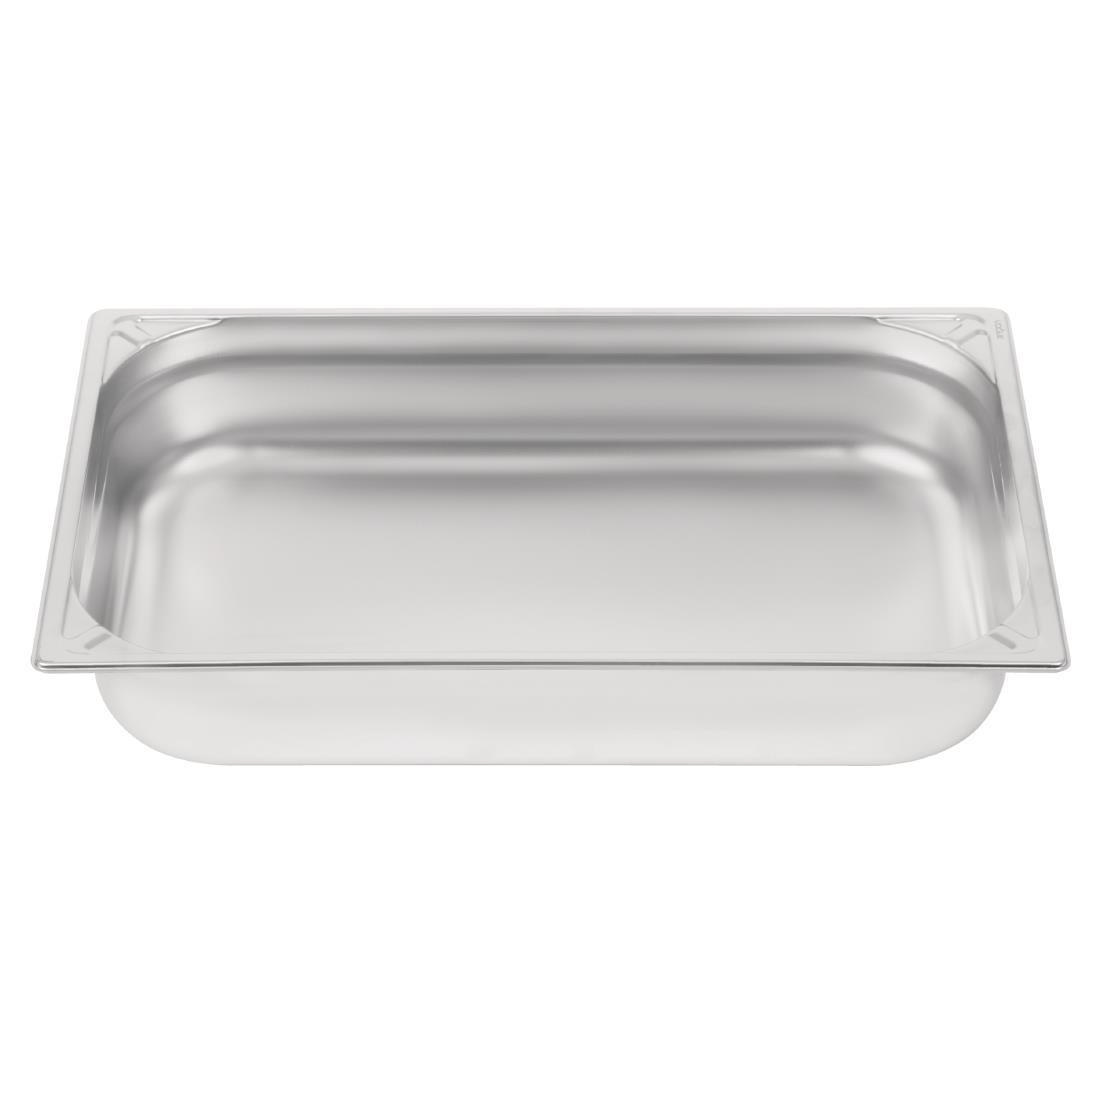 Vogue Heavy Duty Stainless Steel 1/1 Gastronorm Pan 100mm - DW434  - 2